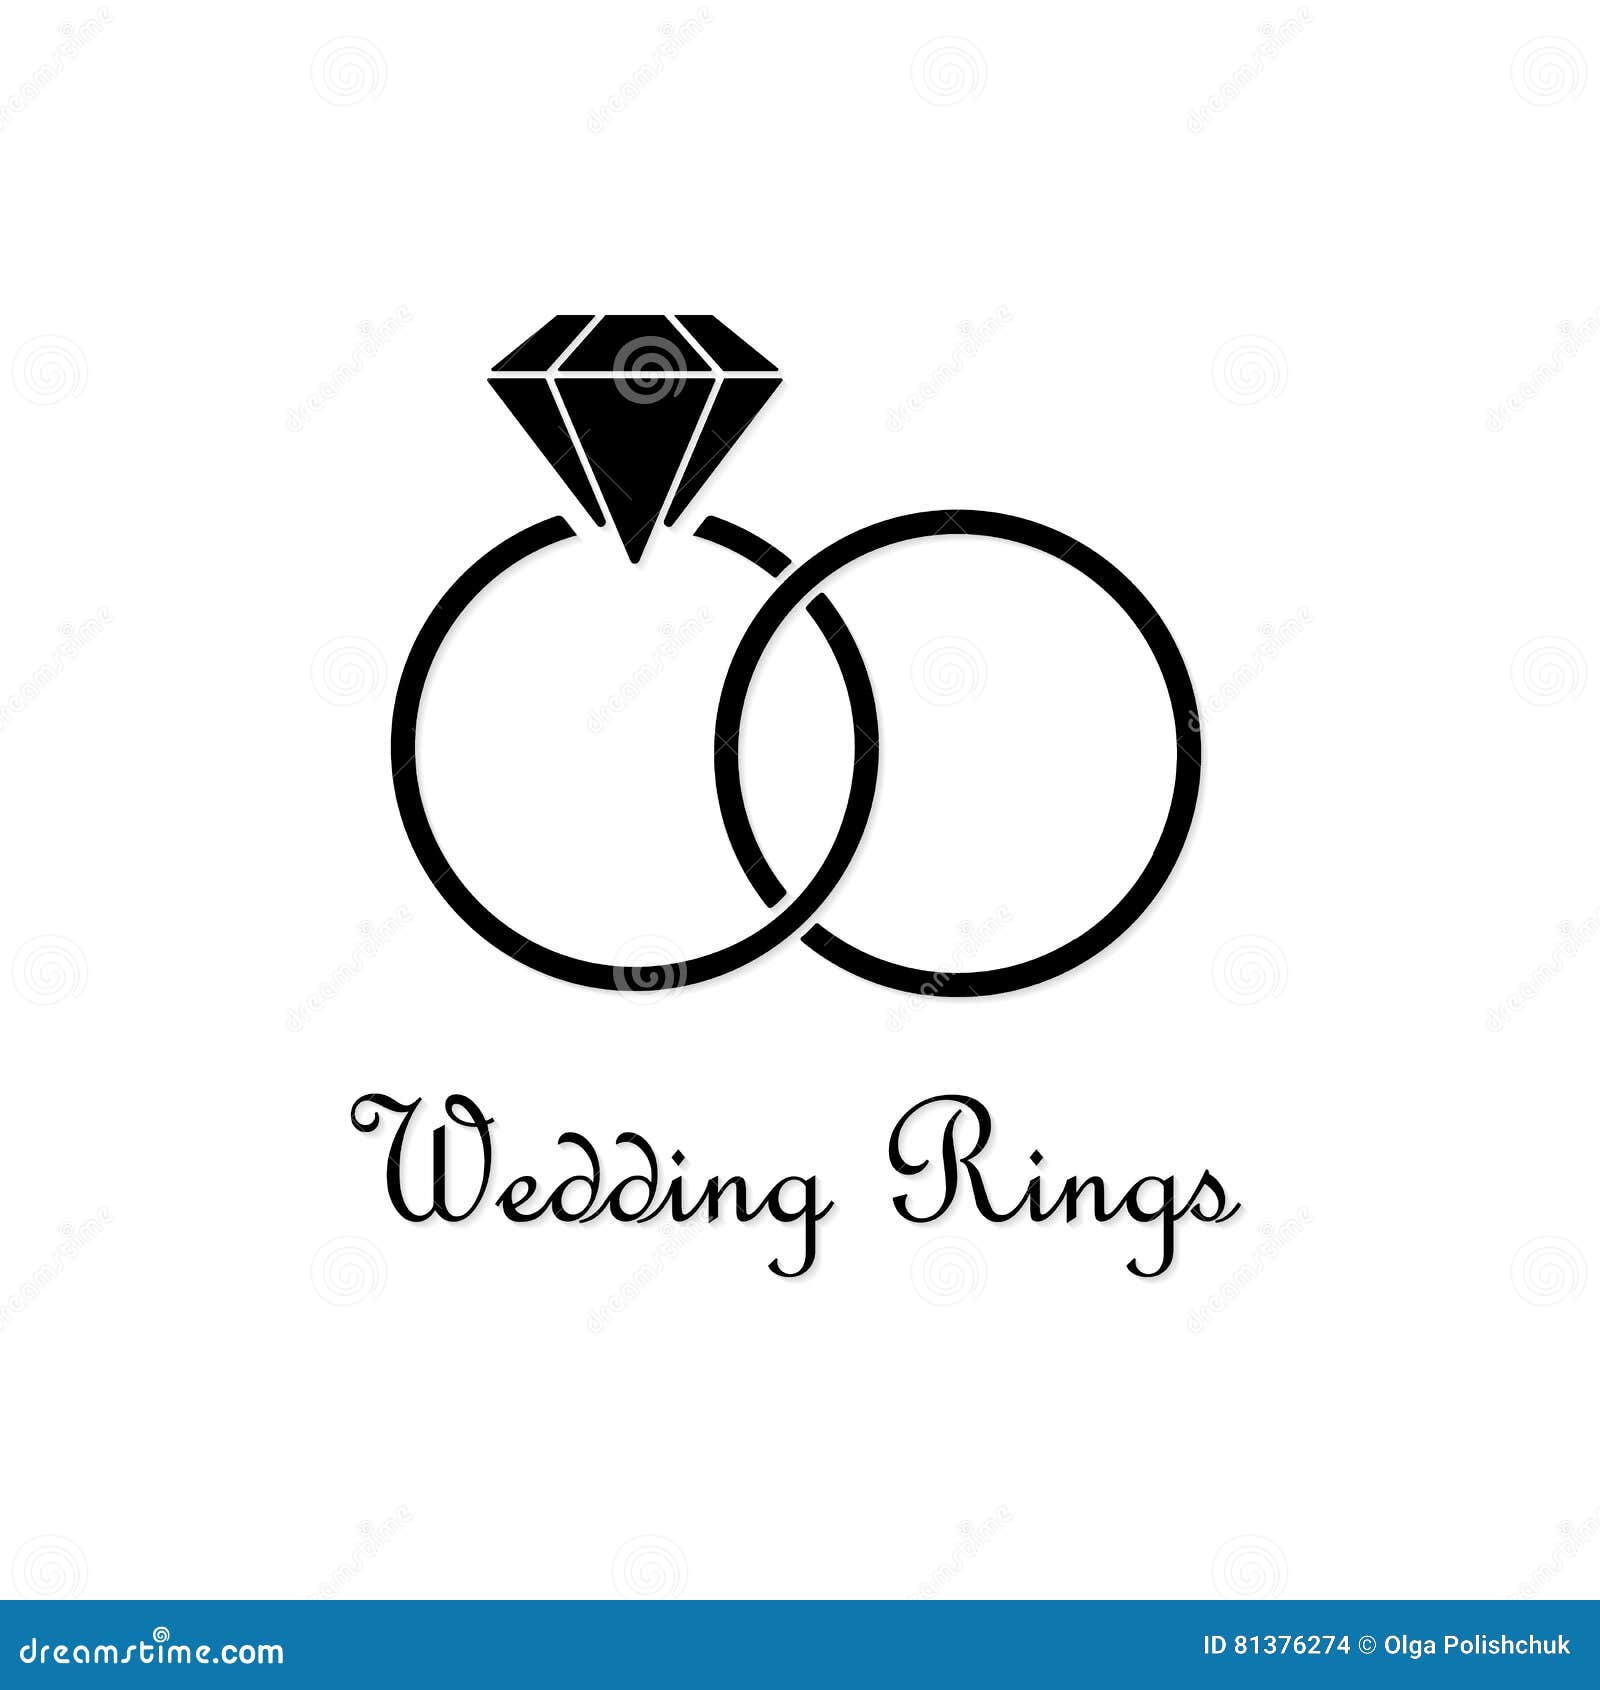 Ring Ceremony Cliparts, Stock Vector and Royalty Free Ring Ceremony  Illustrations